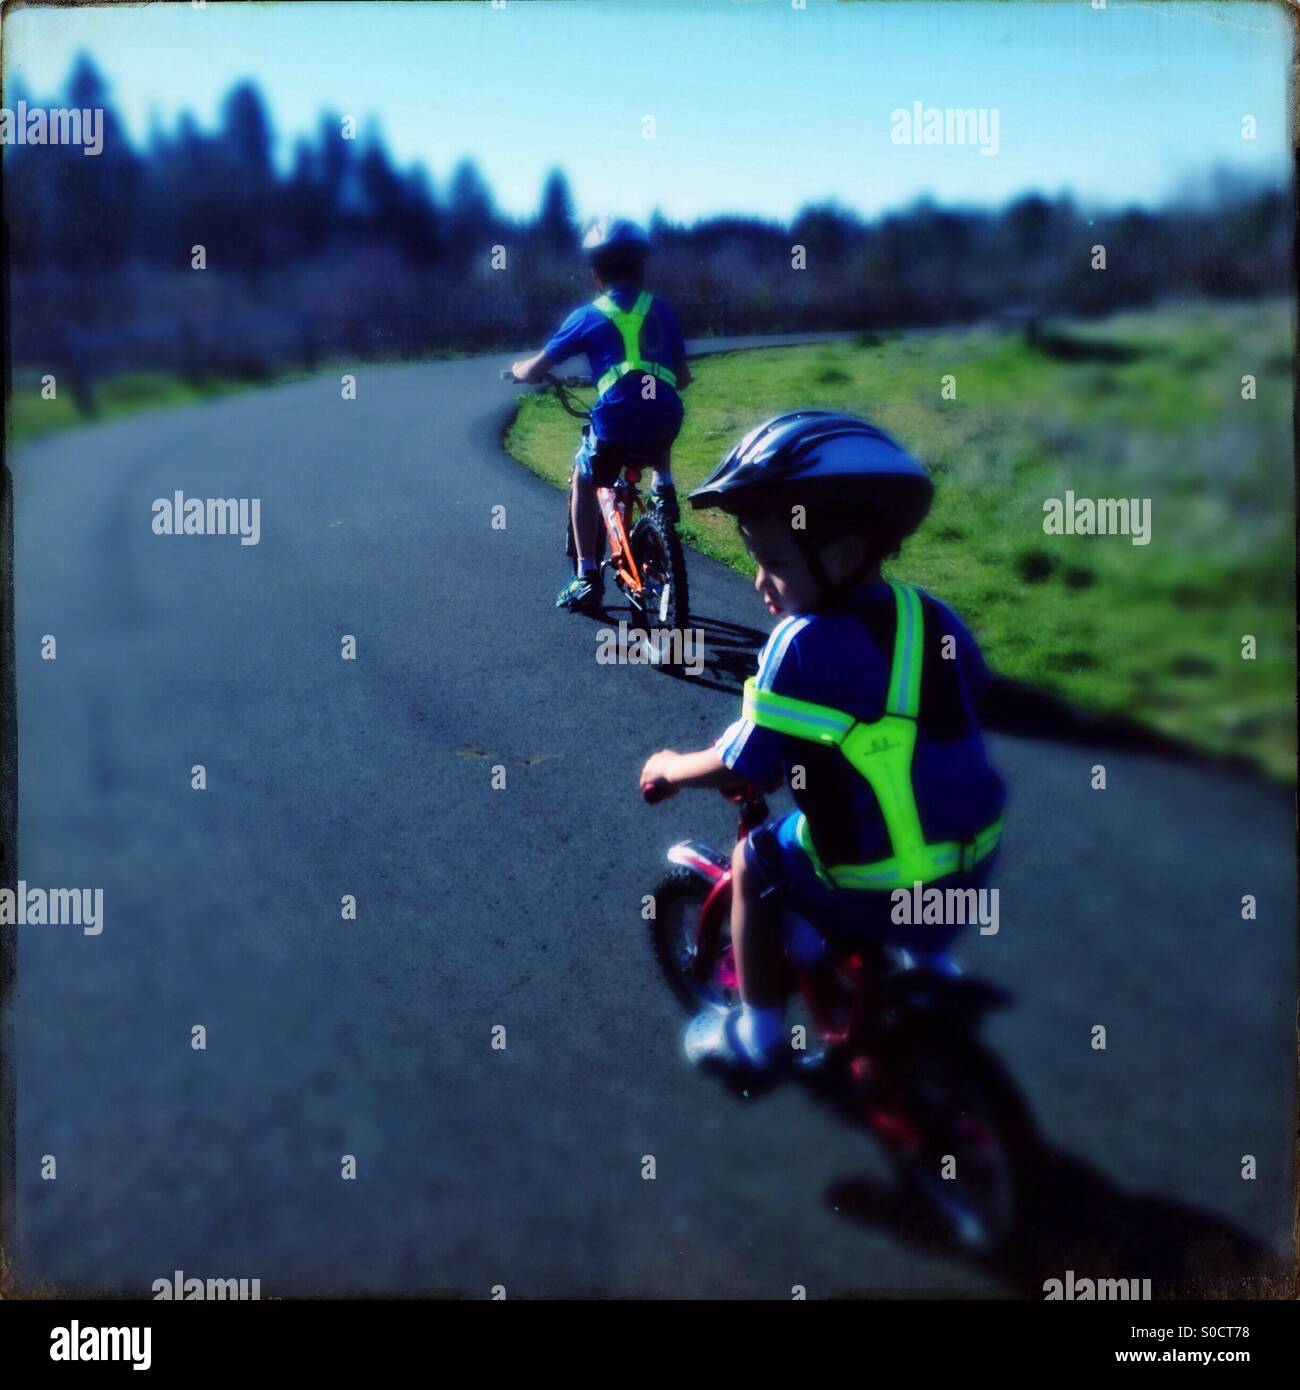 Two boys riding bicycles on path in a park on a sunny day wearing safety vests and helmets Stock Photo